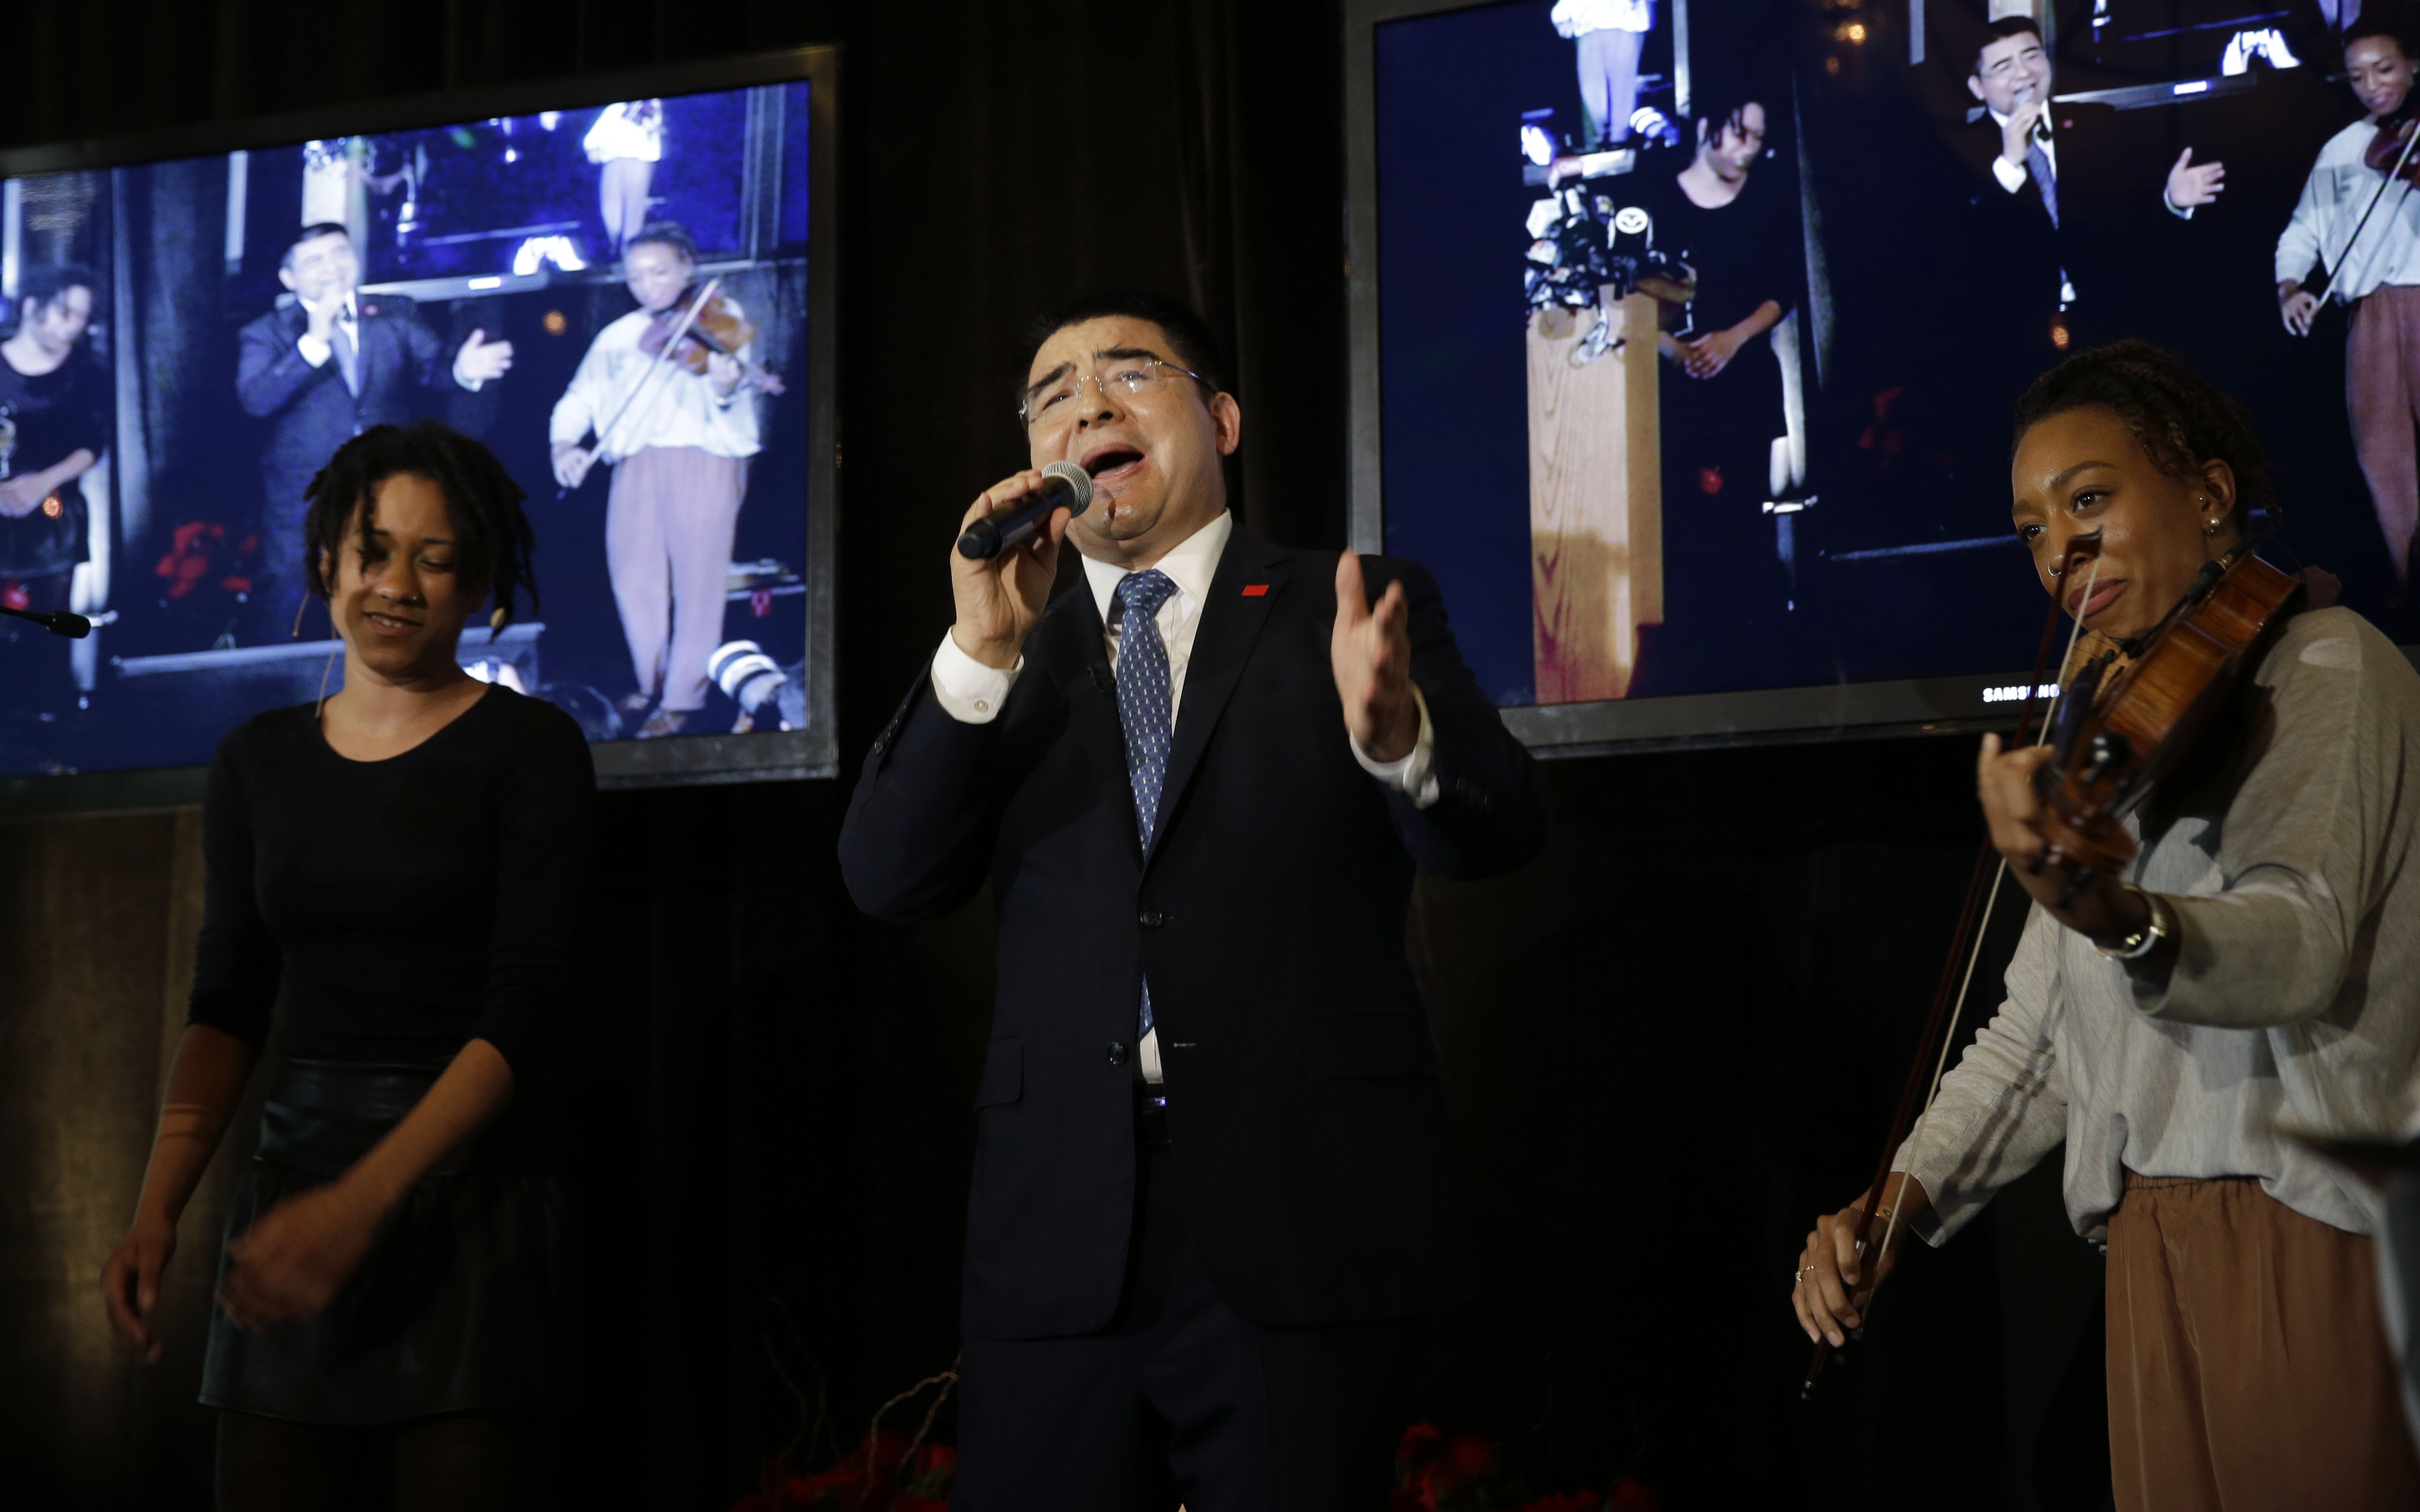 Recycling magnate Chen Guangbiao sings to the media and his guests from the  New York City Rescue Mission at The Loeb Boathouse restaurant in New York, Wednesday, June 25, 2014. The Chinese tycoon known for his sometimes eccentric gestures served up a fancy lunch Wednesday to hundreds of homeless New Yorkers at a Central Park restaurant and serenaded them with "We are the World." Chen said he wants to disprove the cliche image of rich Chinese spending money mostly on luxuries. (AP Photo/Seth Wenig) (Seth Wenig&mdash;ASSOCIATED PRESS)